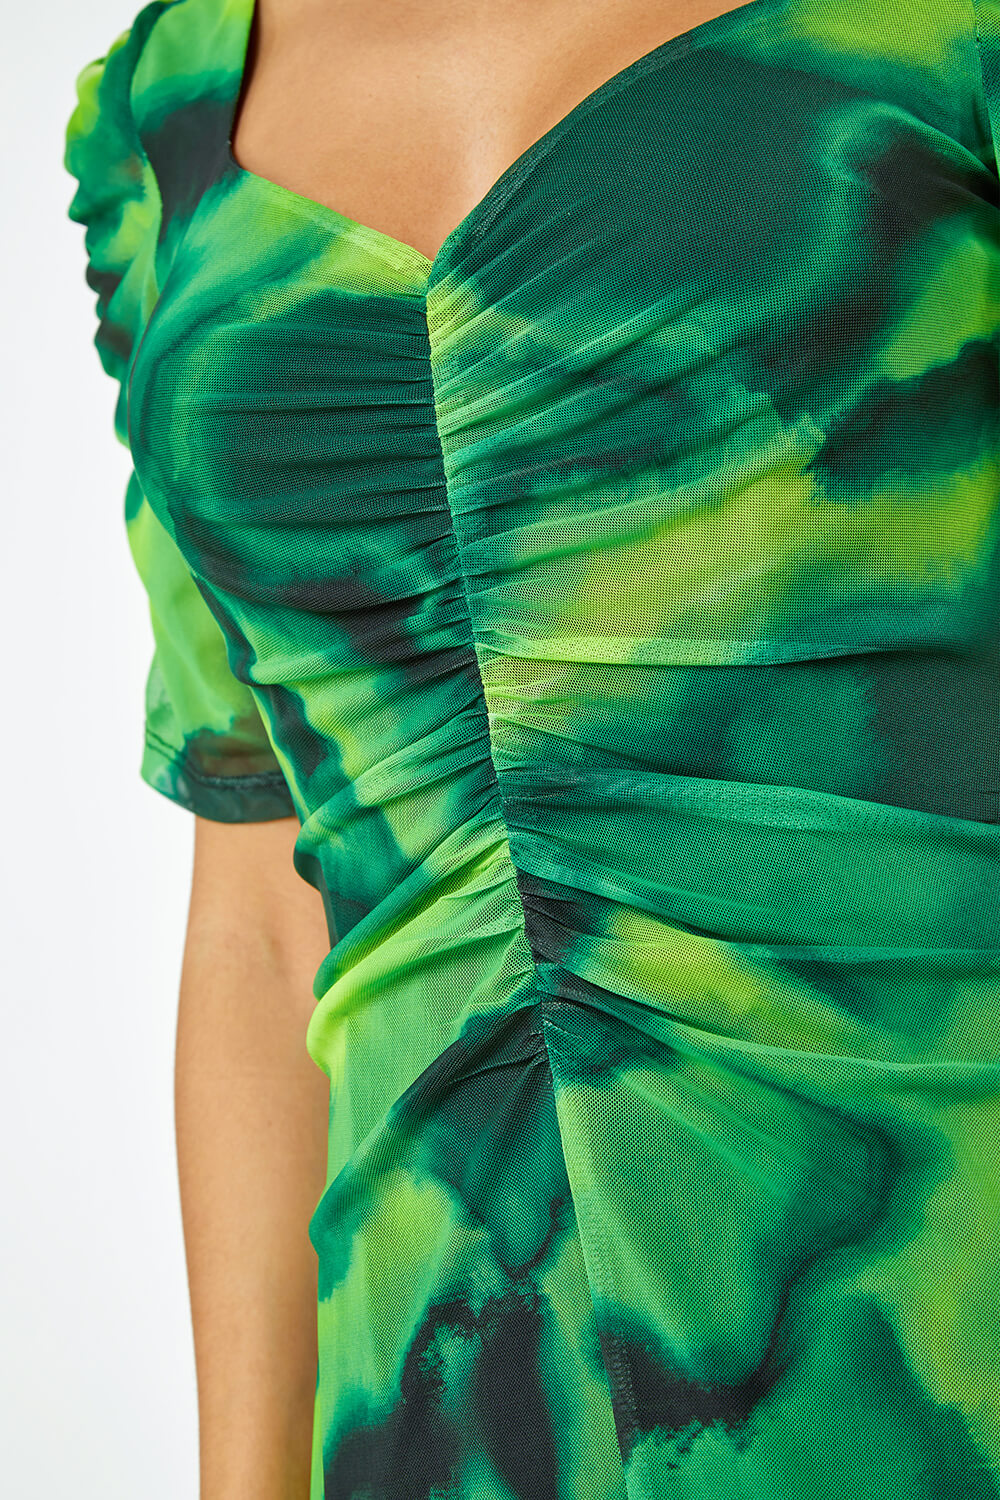 Green Marble Print Stretch Mesh Ruched Dress, Image 5 of 5